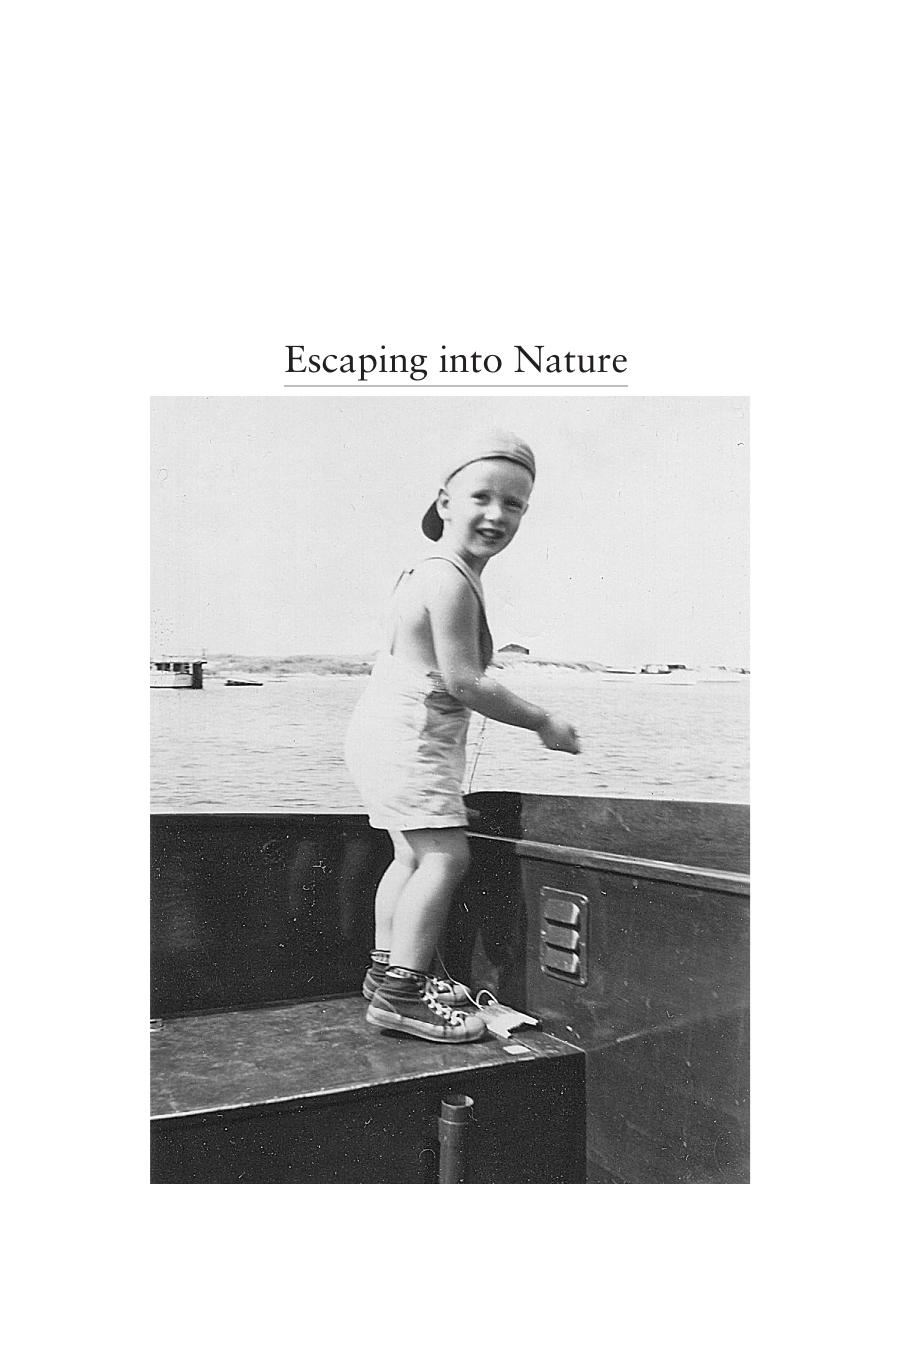 Escaping into Nature: The Making of a Sportsman-Conservationist and Environmental Historian by John F. Reiger